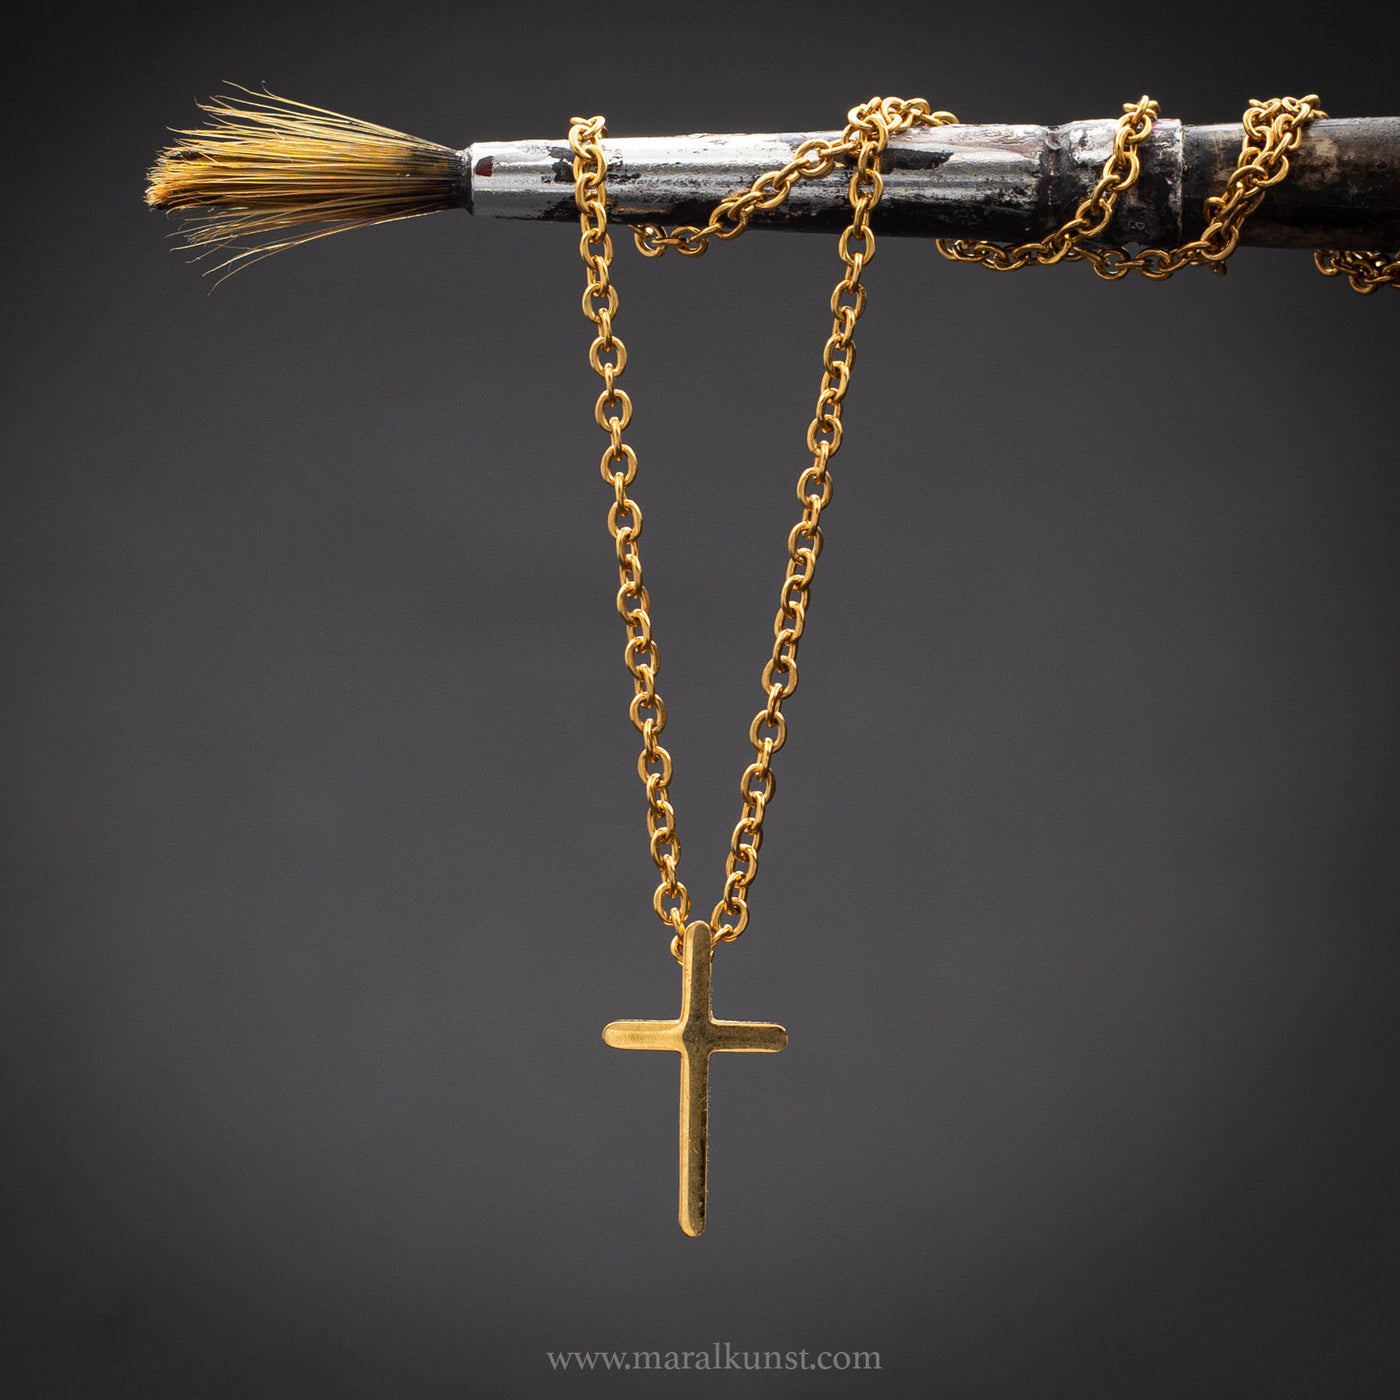 Gold plated steel cross necklace